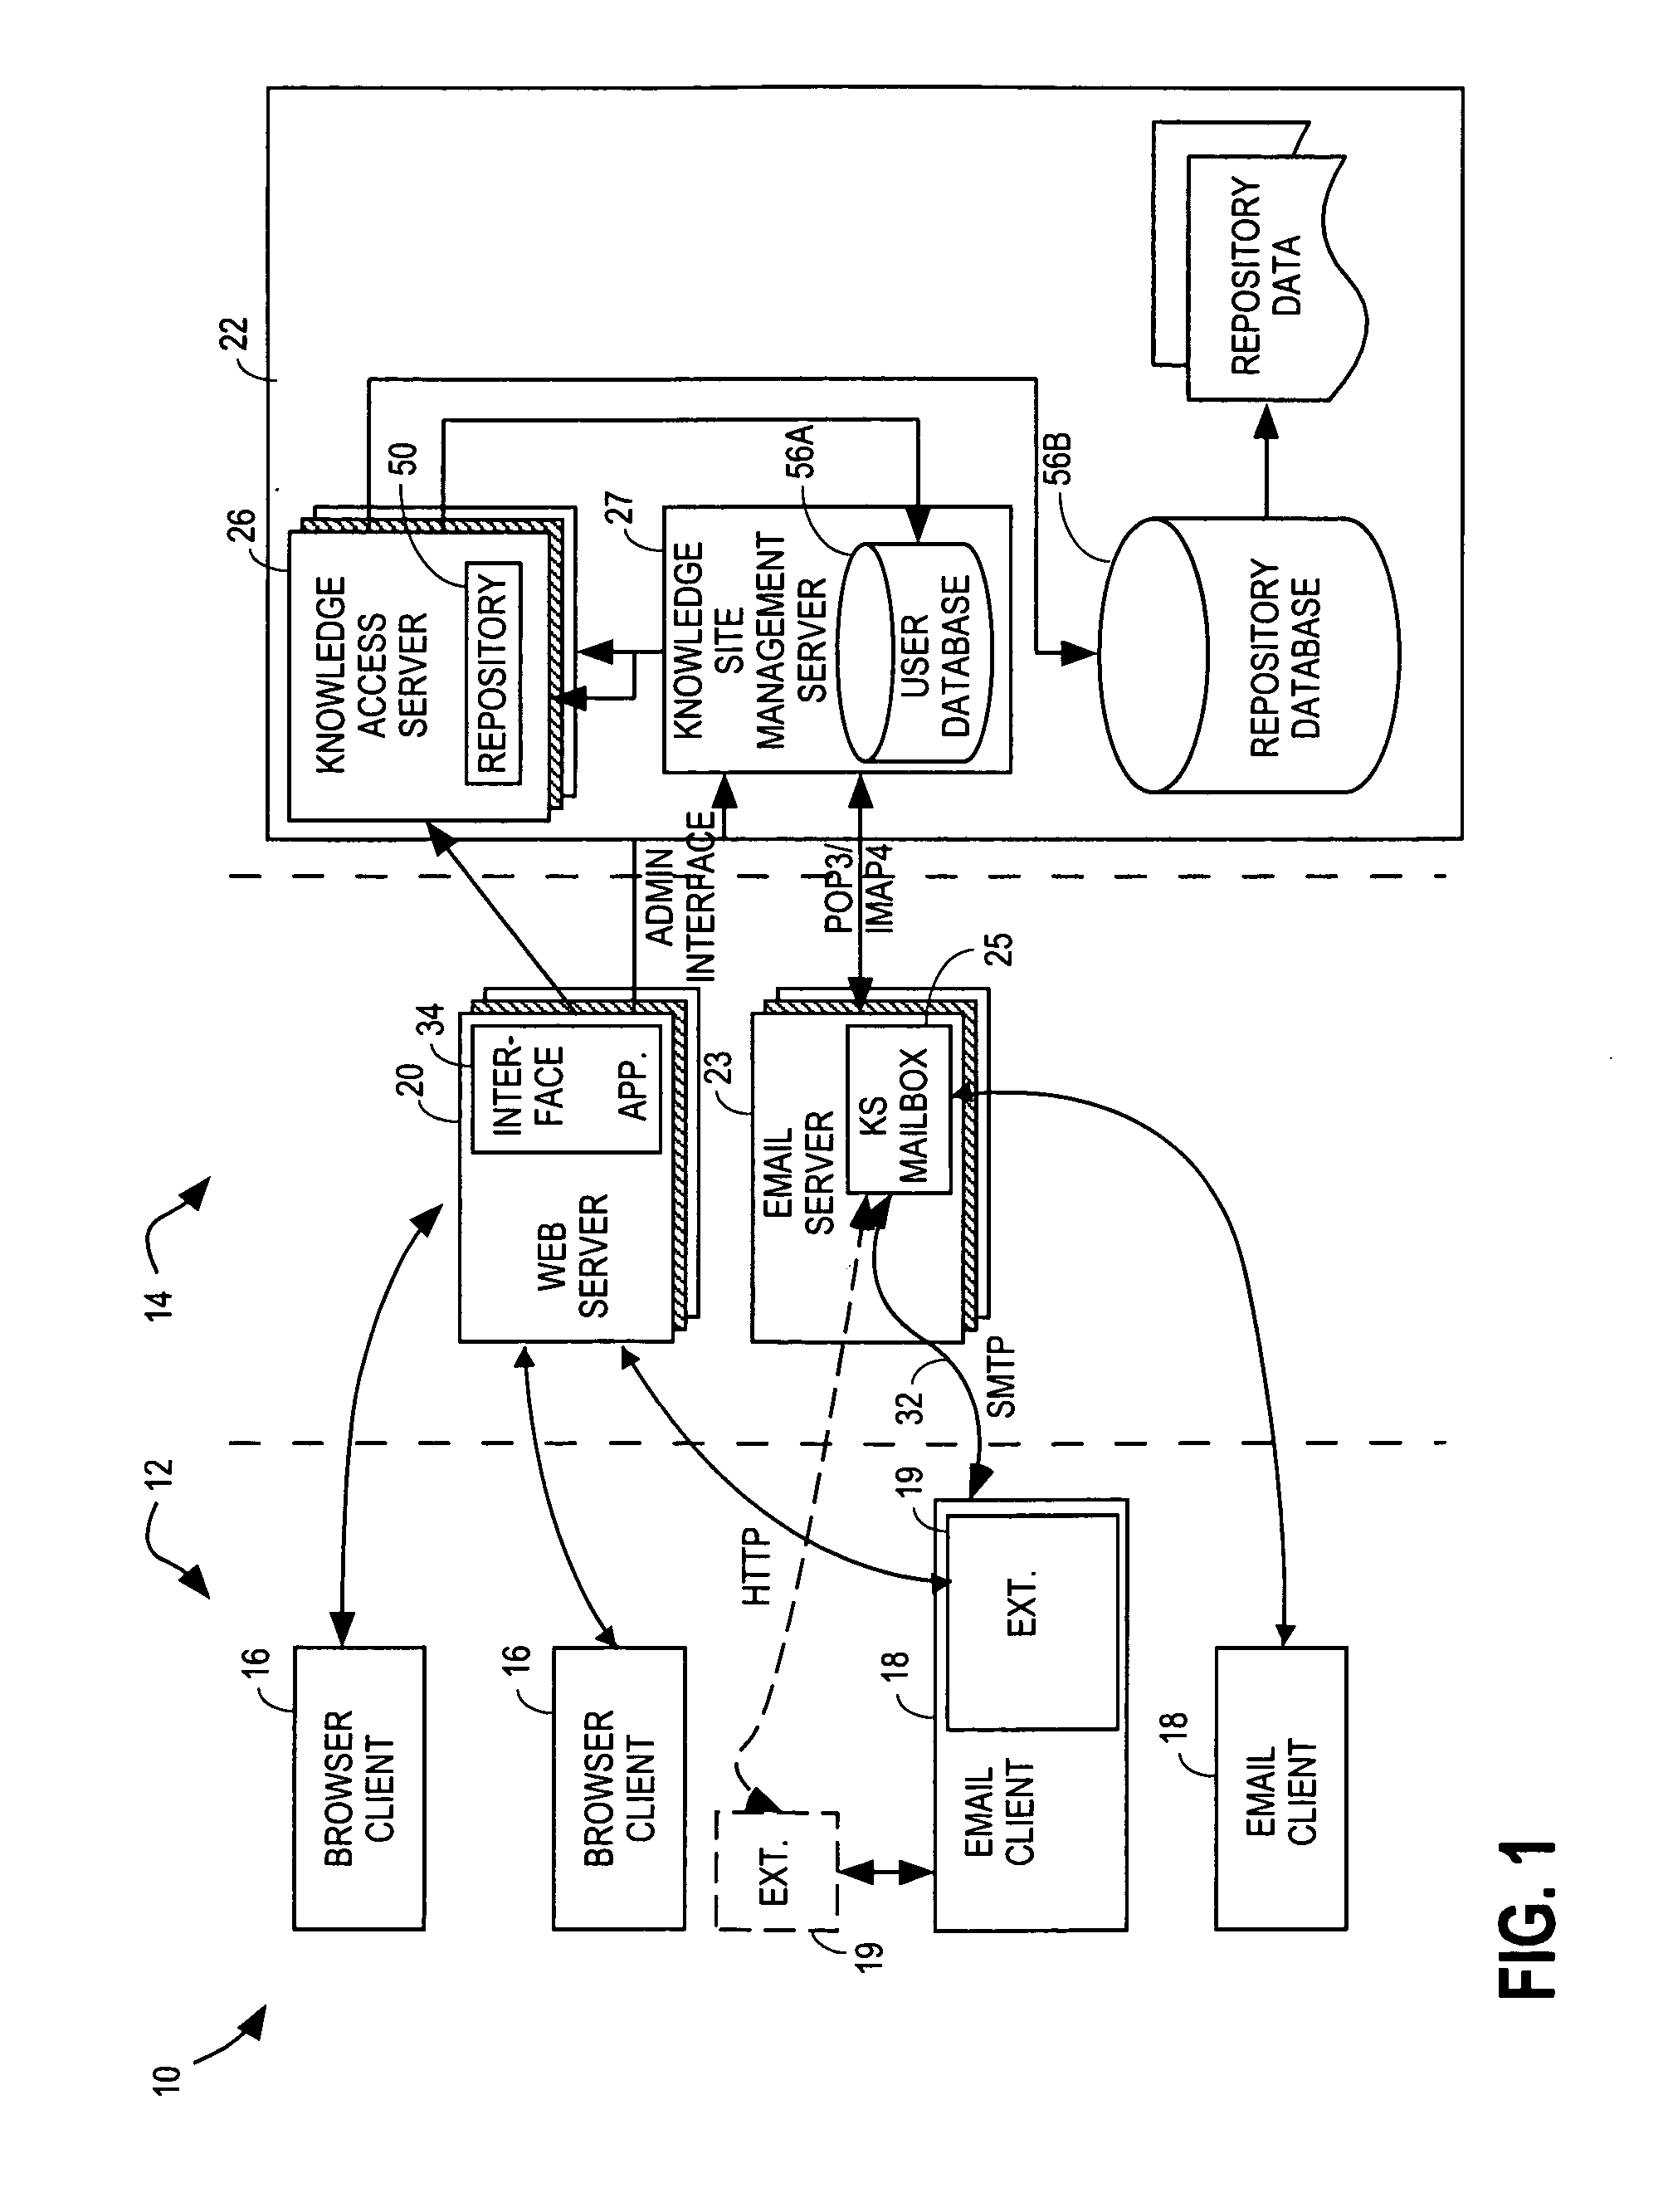 Method and apparatus for constructing and maintaining a user knowledge profile